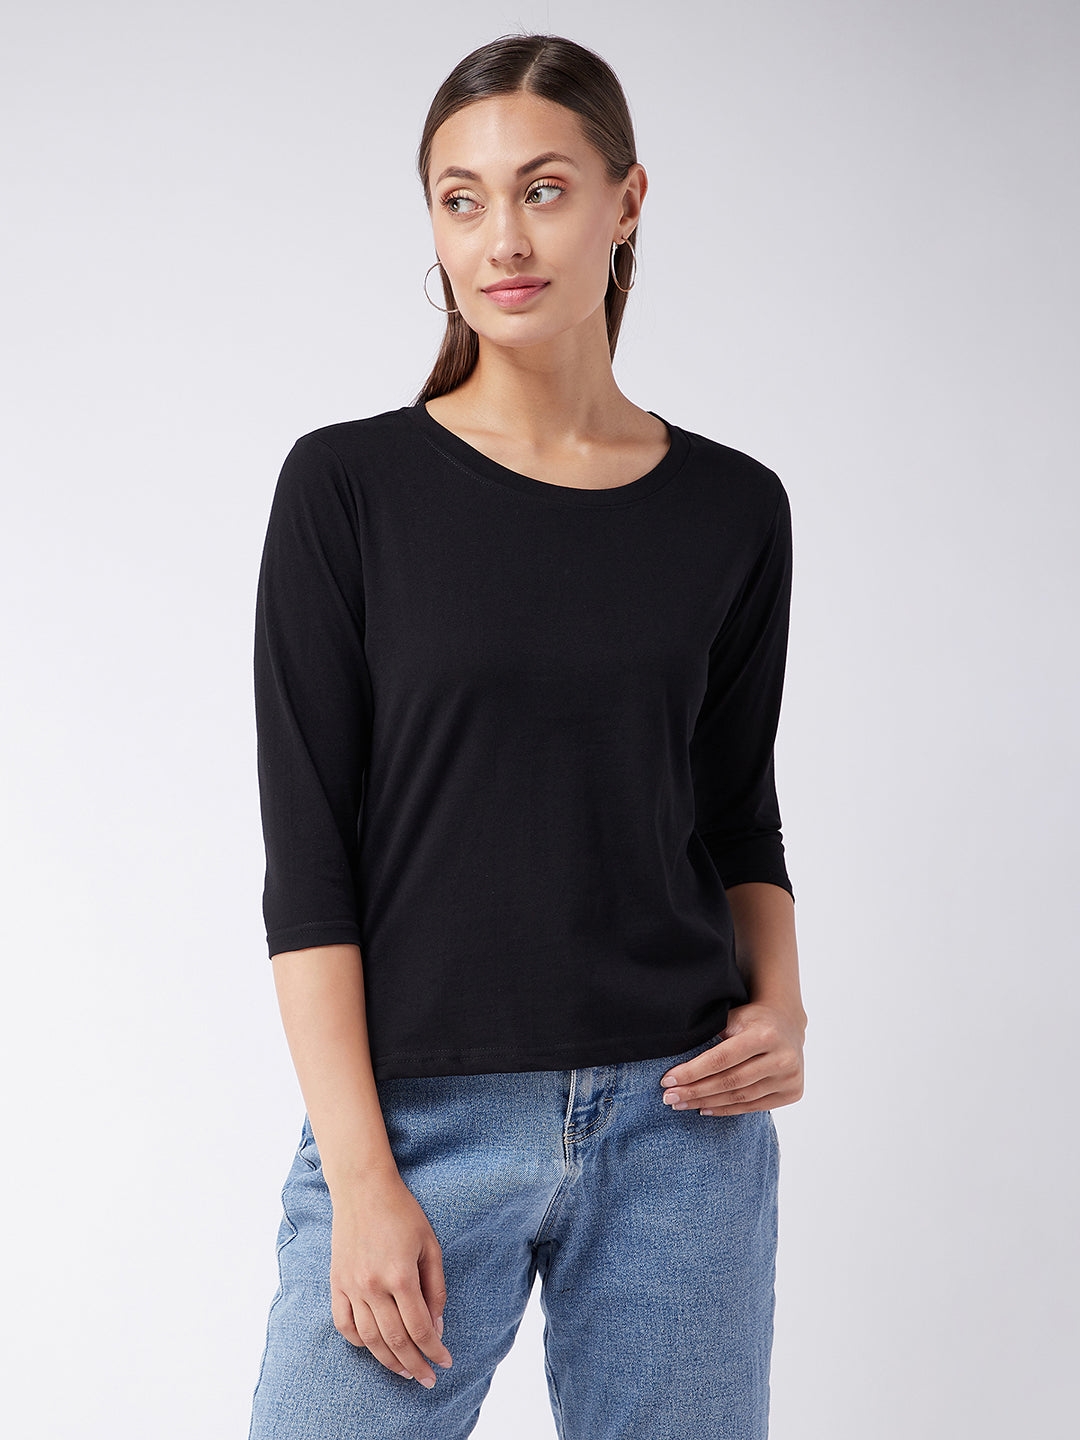 Black Round Neck 3/4 Sleeves Solid Basic Top